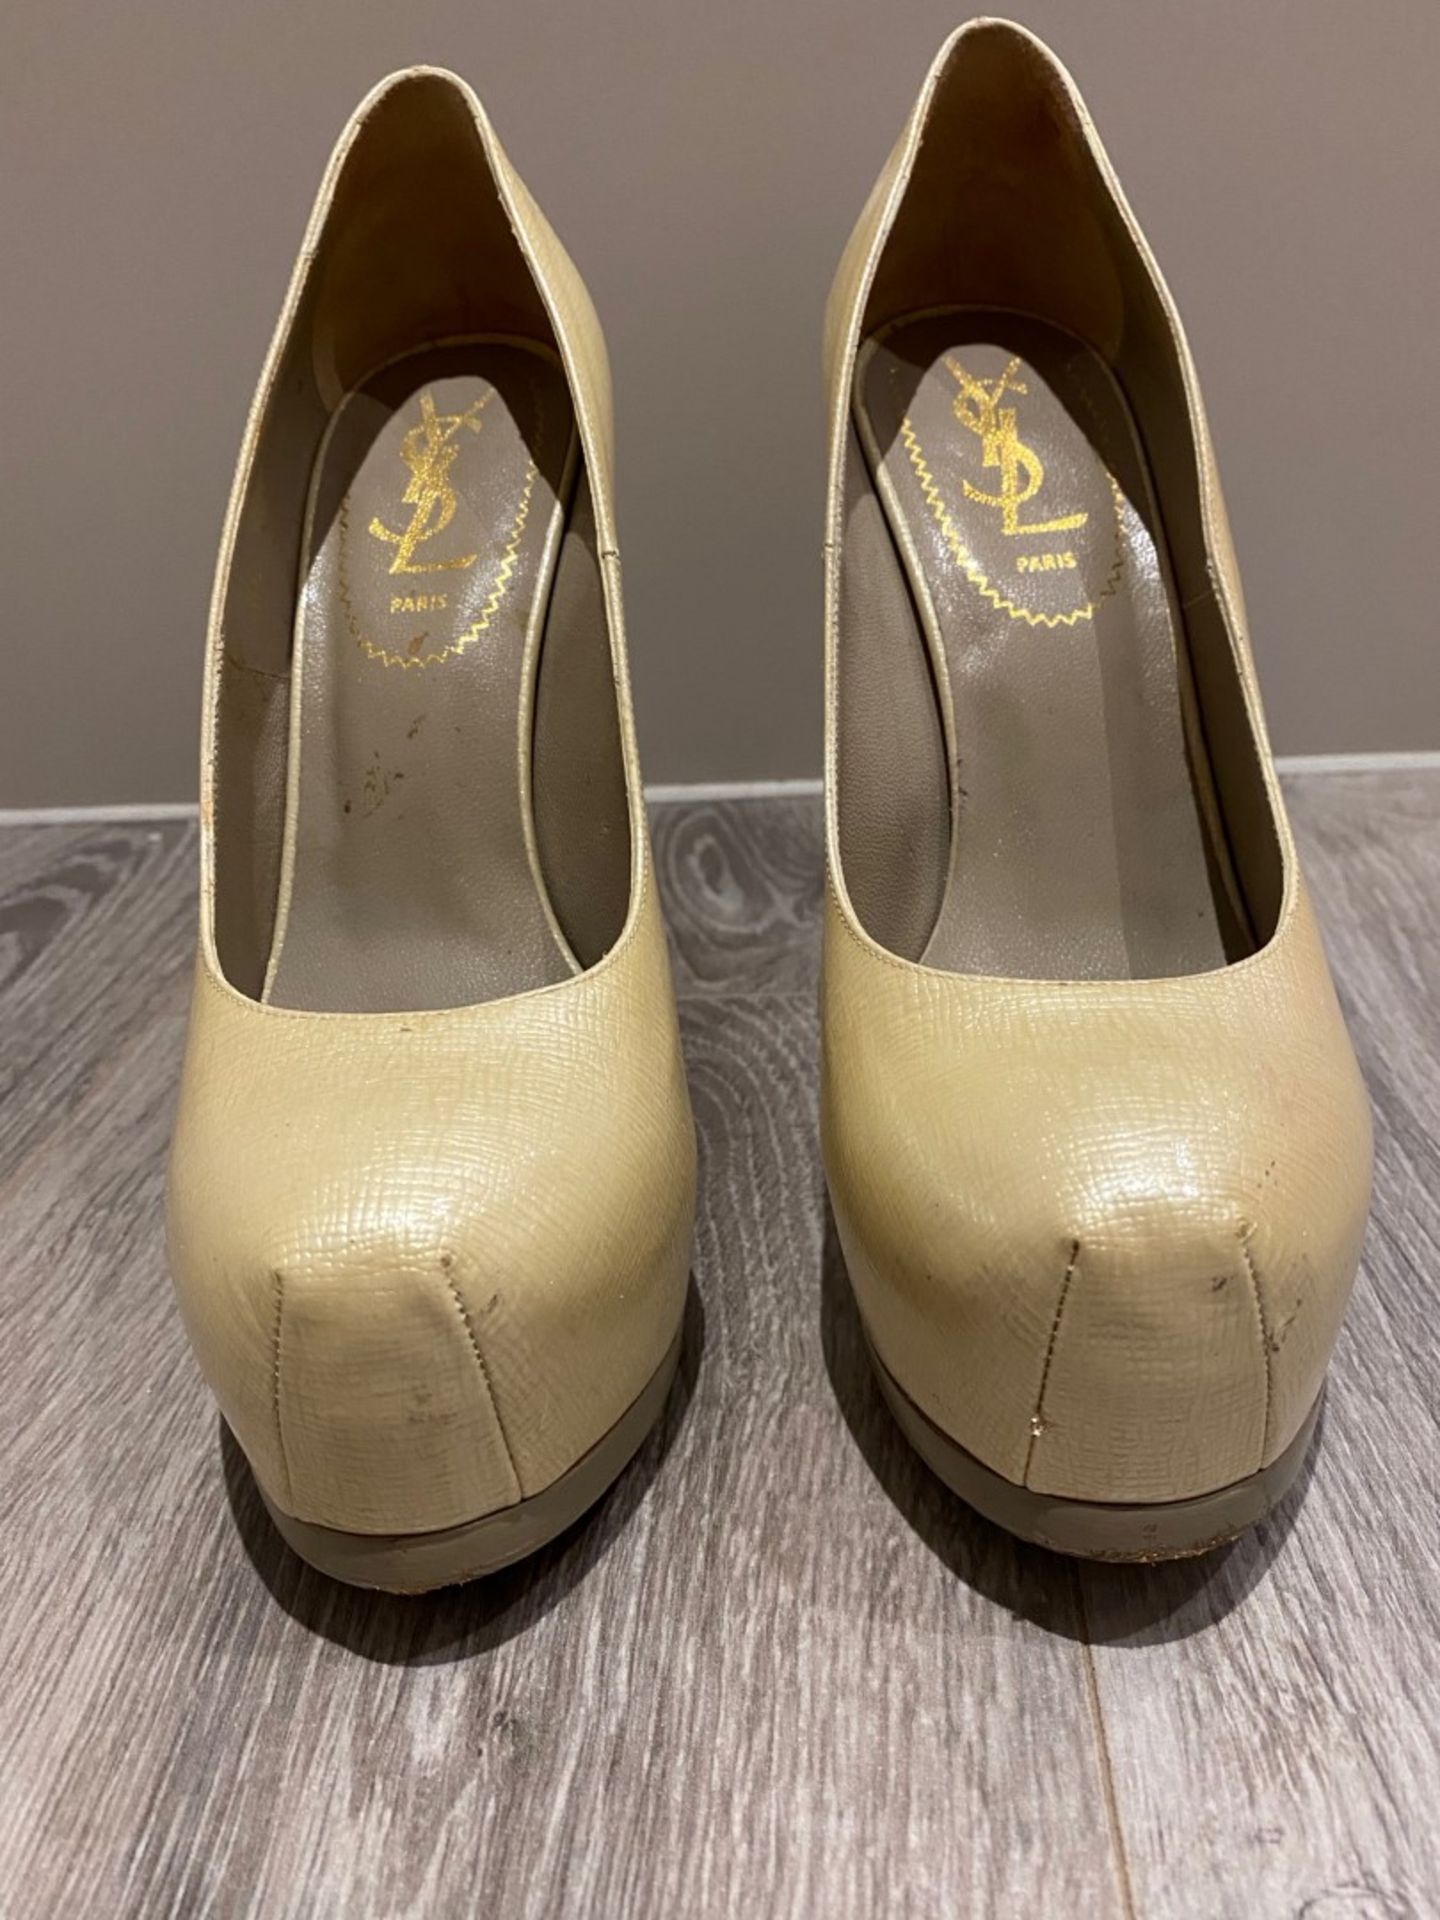 1 x Pair Of Genuine YSL High Heel Shoes In Champagne - Size: 36 - Preowned in Worn Condition - Ref: - Image 2 of 5